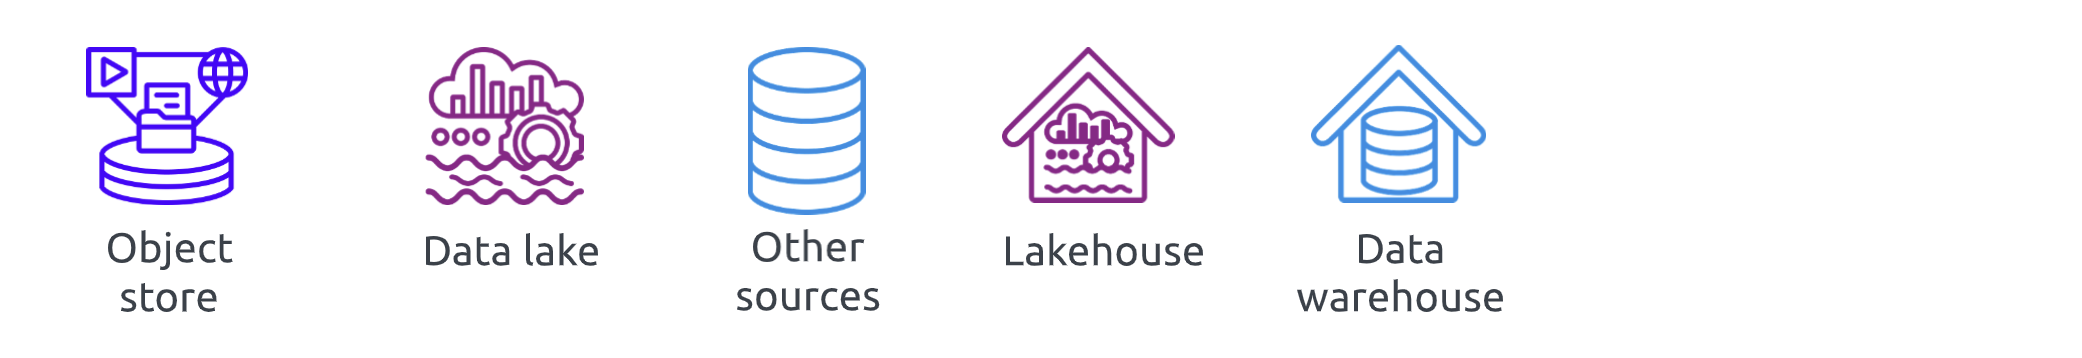 Icons depicting data source types